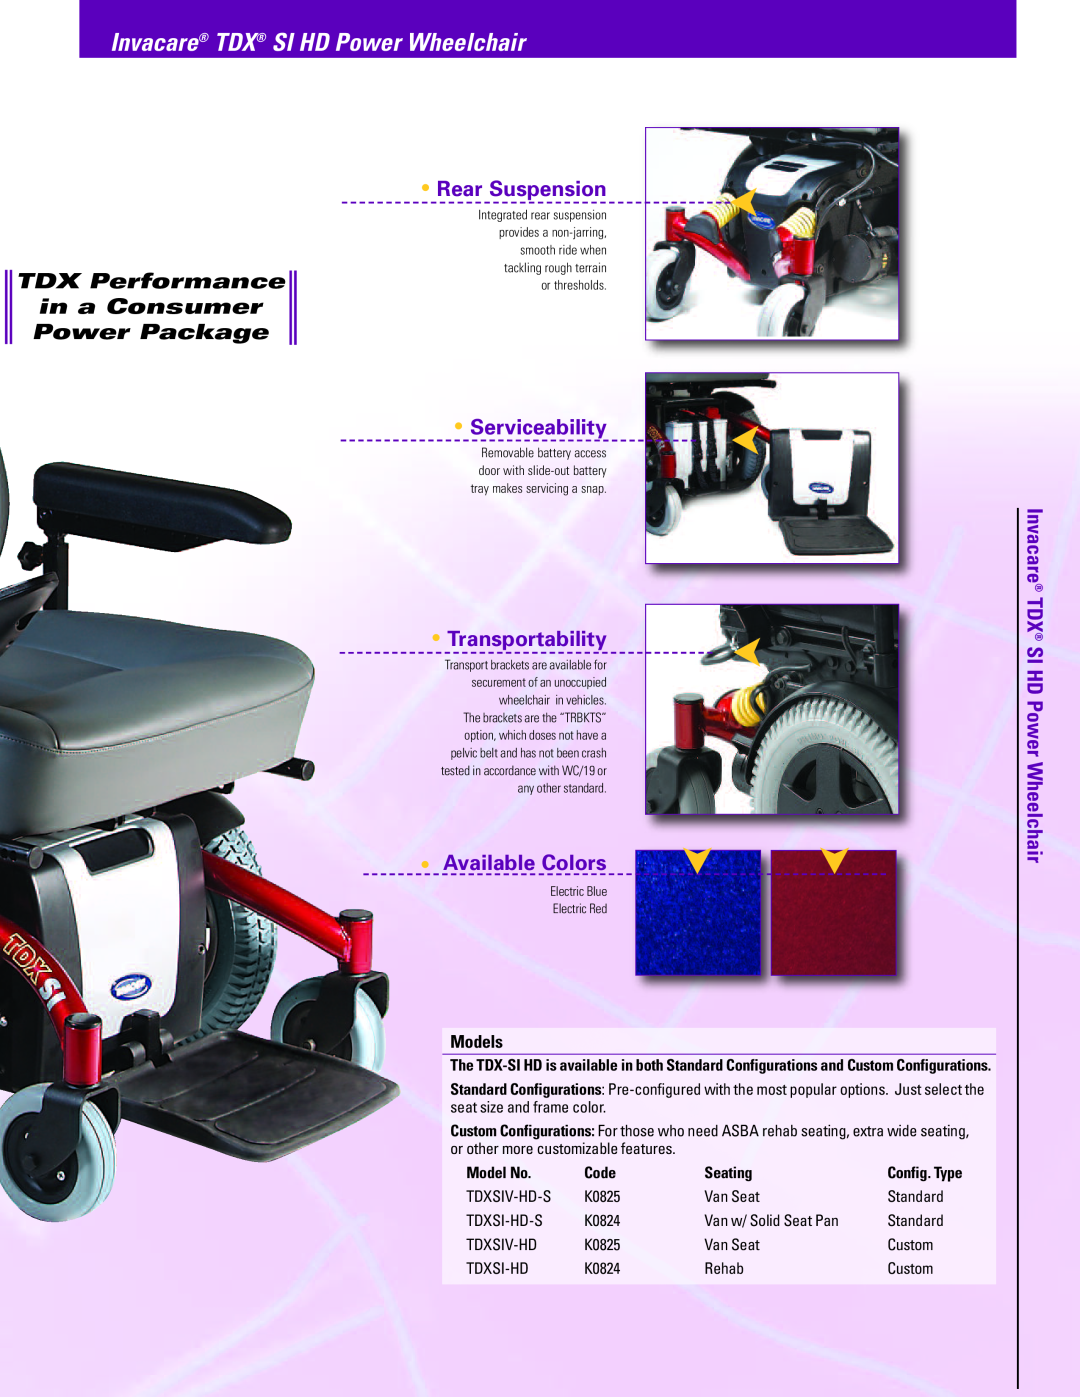 Invacare TDXSI-HD-S Rear Suspension, Serviceability, Transportability, Available Colors, Models, 3GRX-CG, Model No 